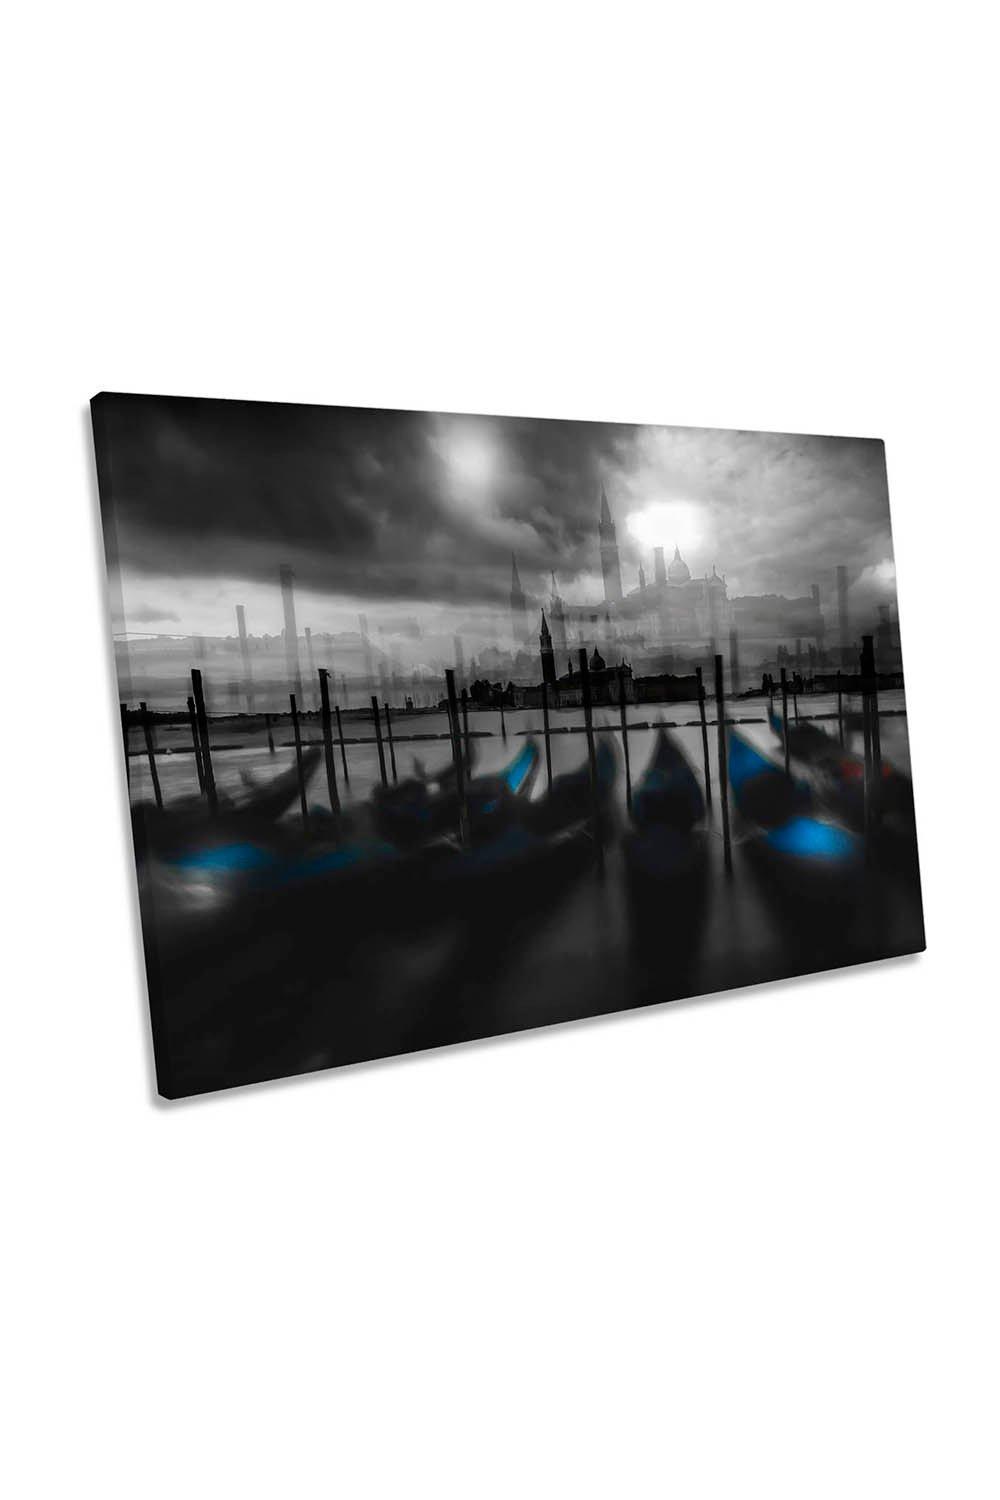 Dark Mood Venice Canal City Abstract Canvas Wall Art Picture Print